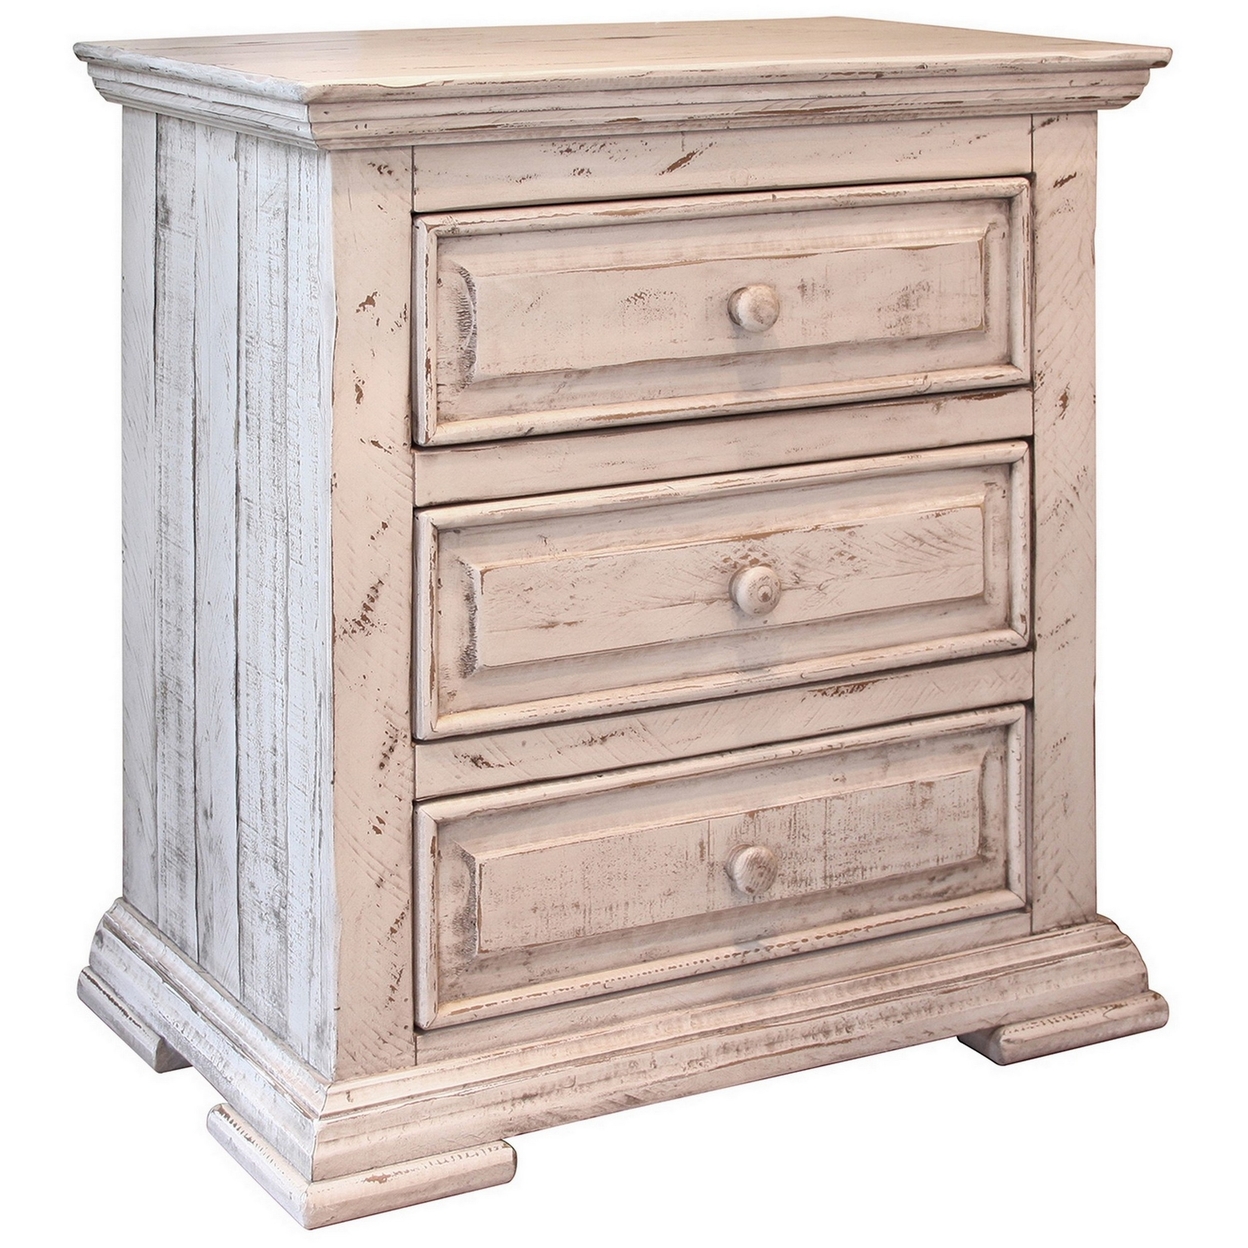 Abi 32 Inch Nightstand With 3 Drawers, Distressed Solid Pine Wood, White- Saltoro Sherpi